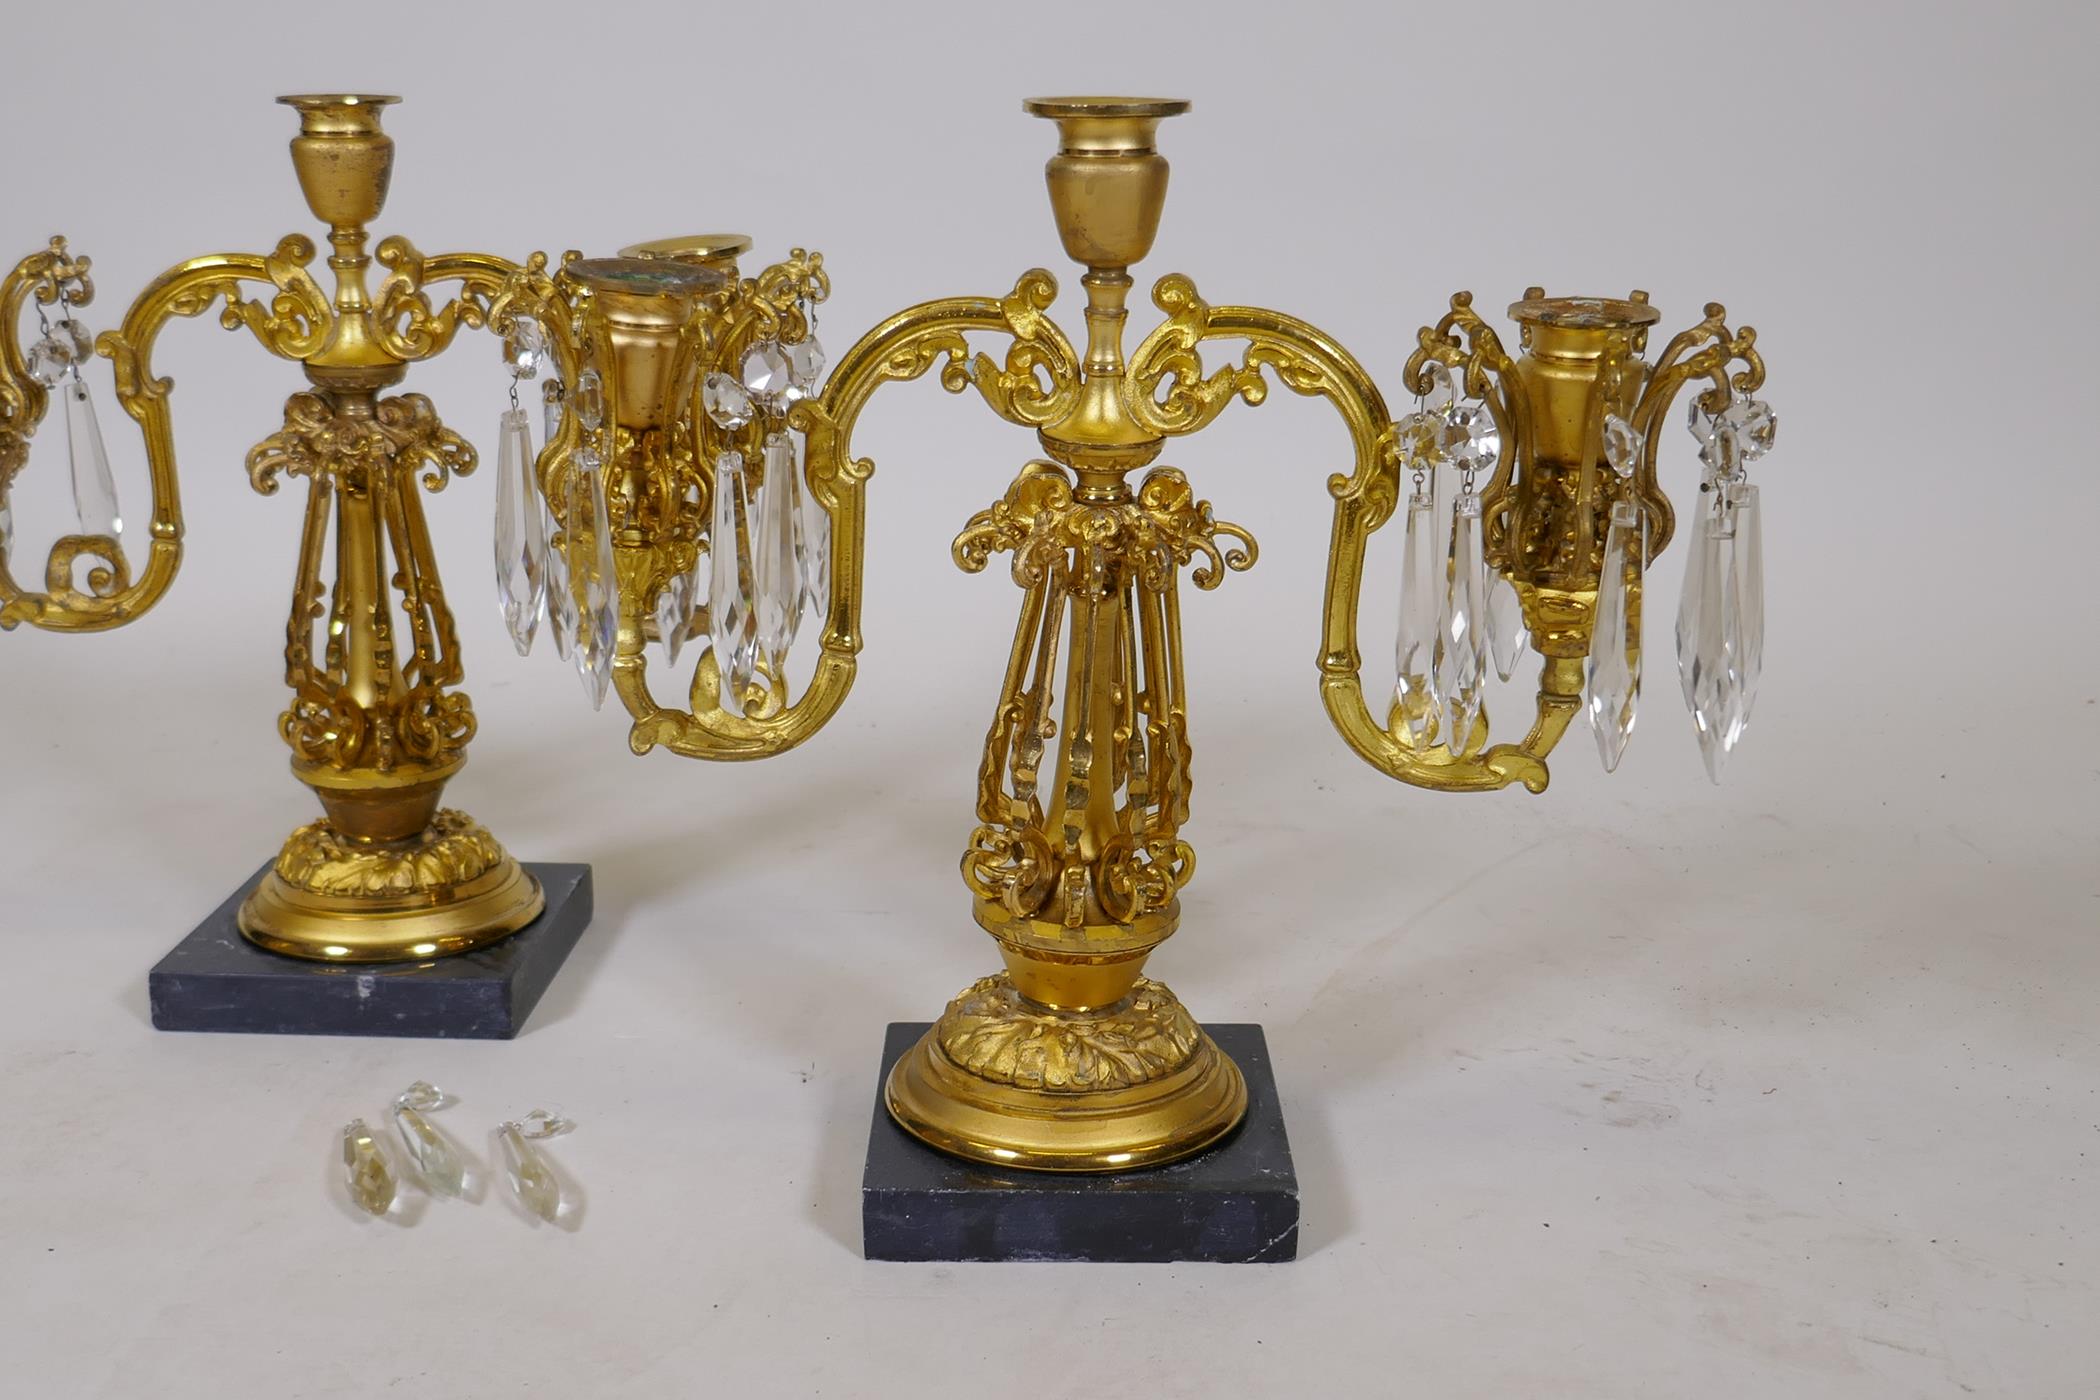 A pair of C19th two branch candelabra with pierced columns and lustre drops, lacking three, 13" high - Image 2 of 3